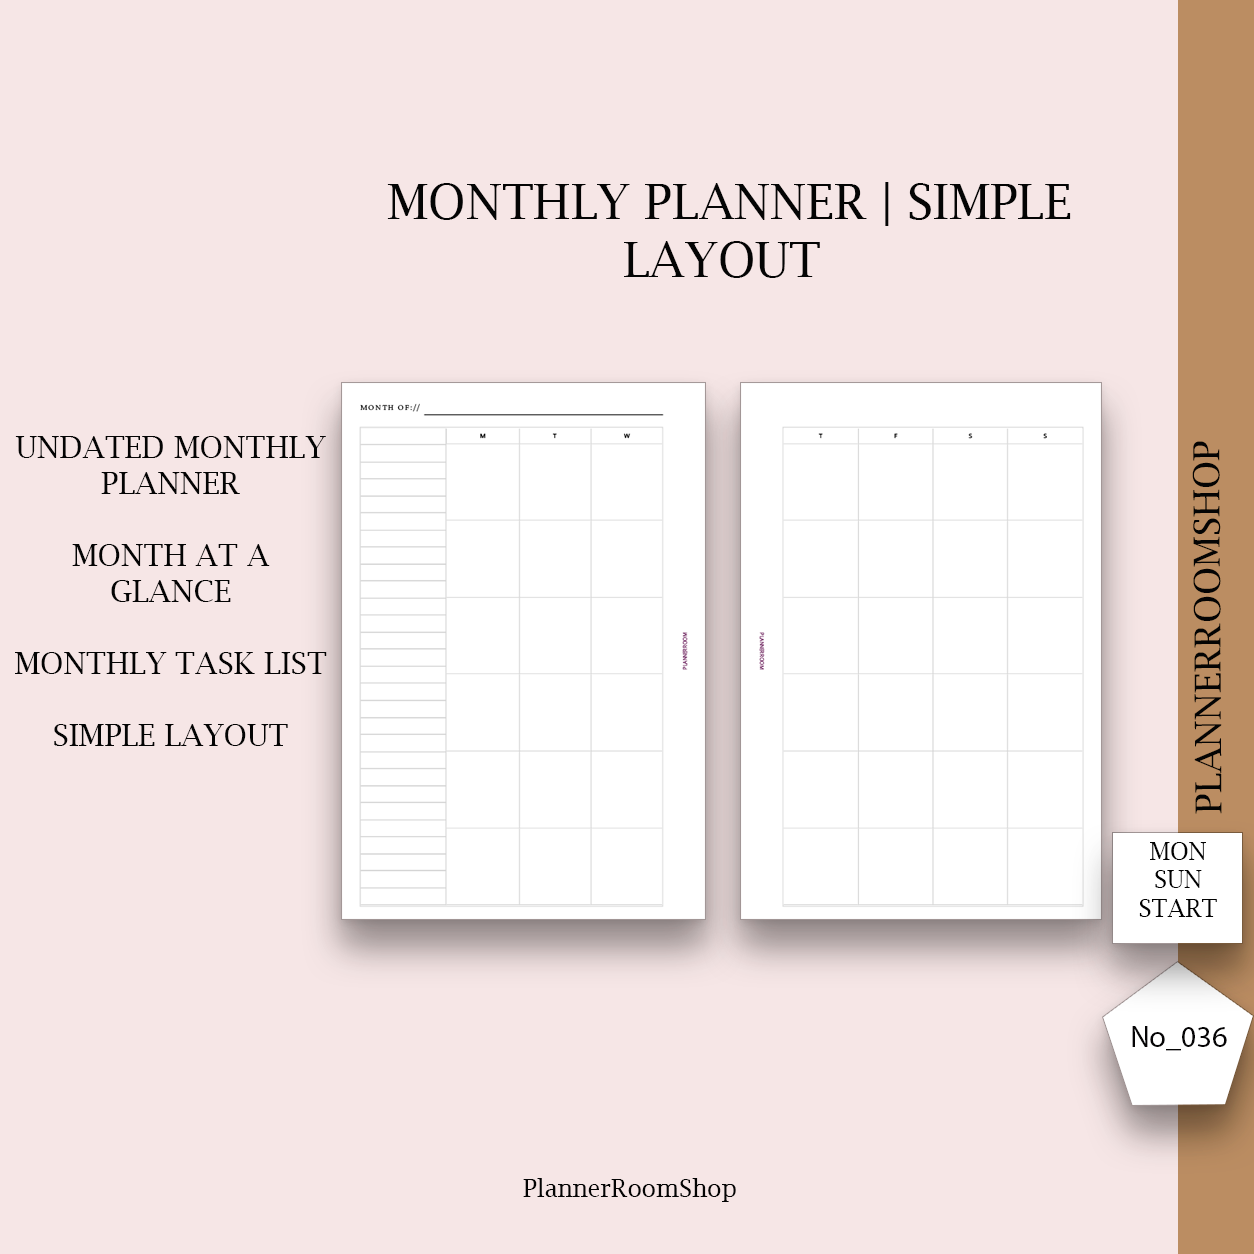 Monthly planner - 036